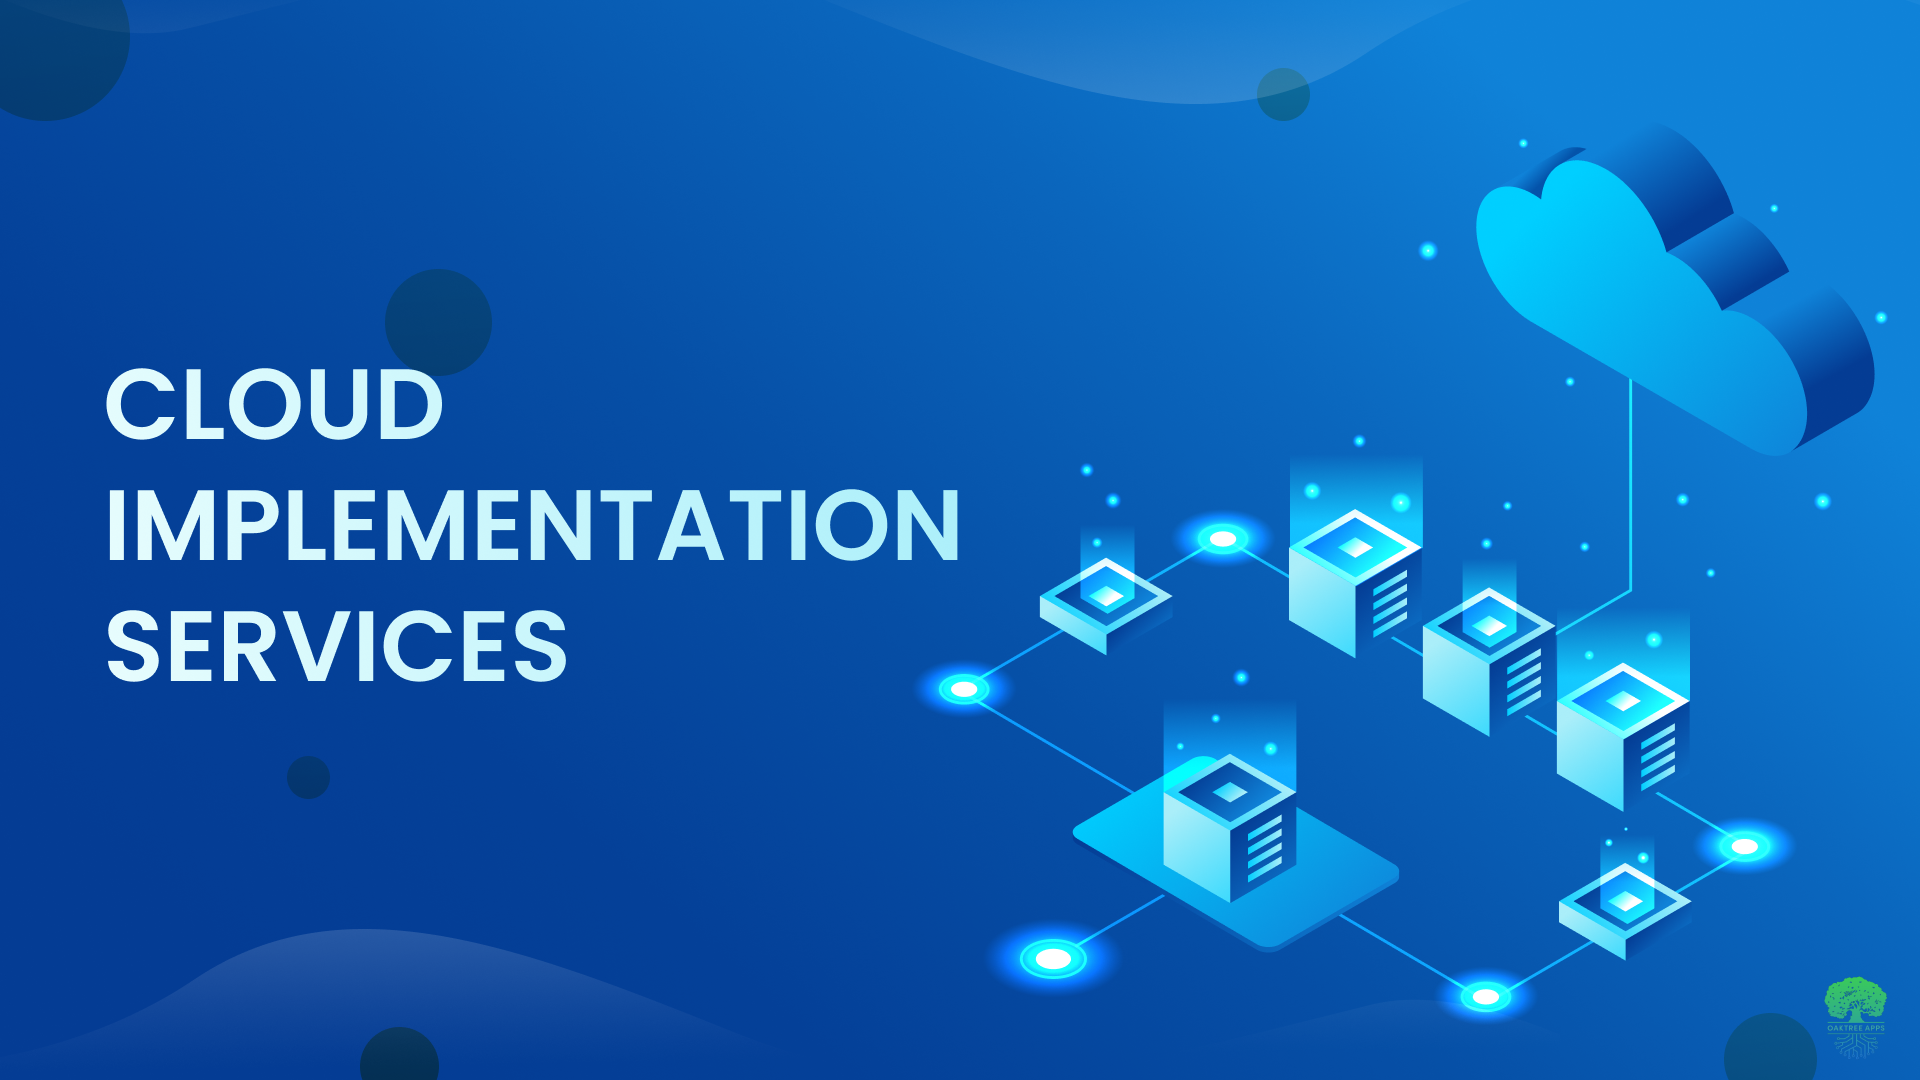 Cloud Migration Services and Solutions - Seamless Transformation